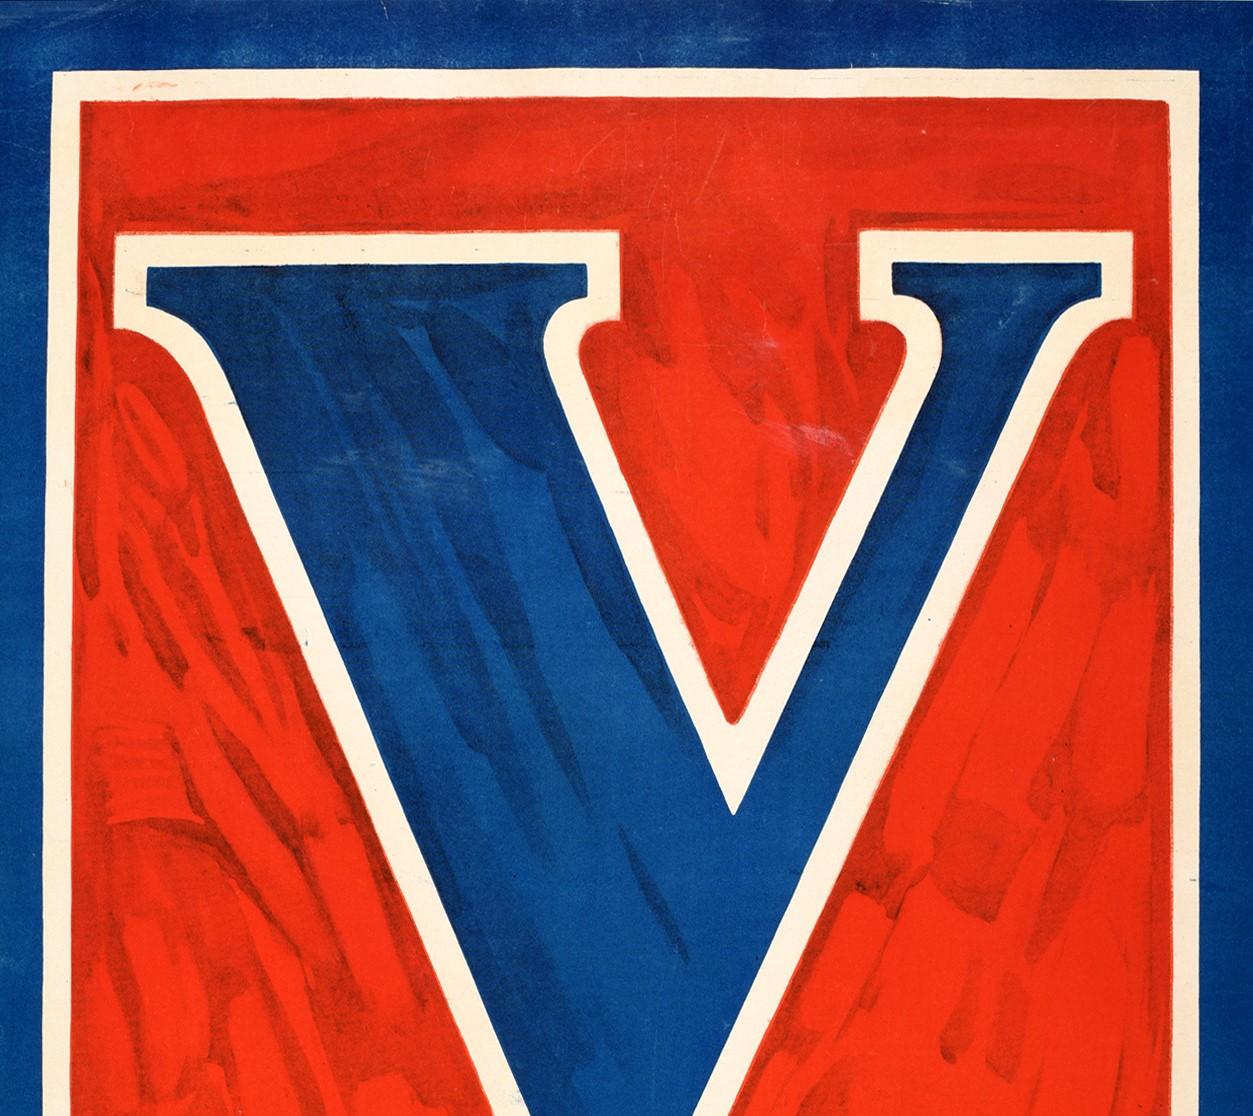 Original antique World War One propaganda poster featuring a bright design of a blue and white V for victory sign against a red background. Published by the United States Government to encourage people to help win the war by investing in victory